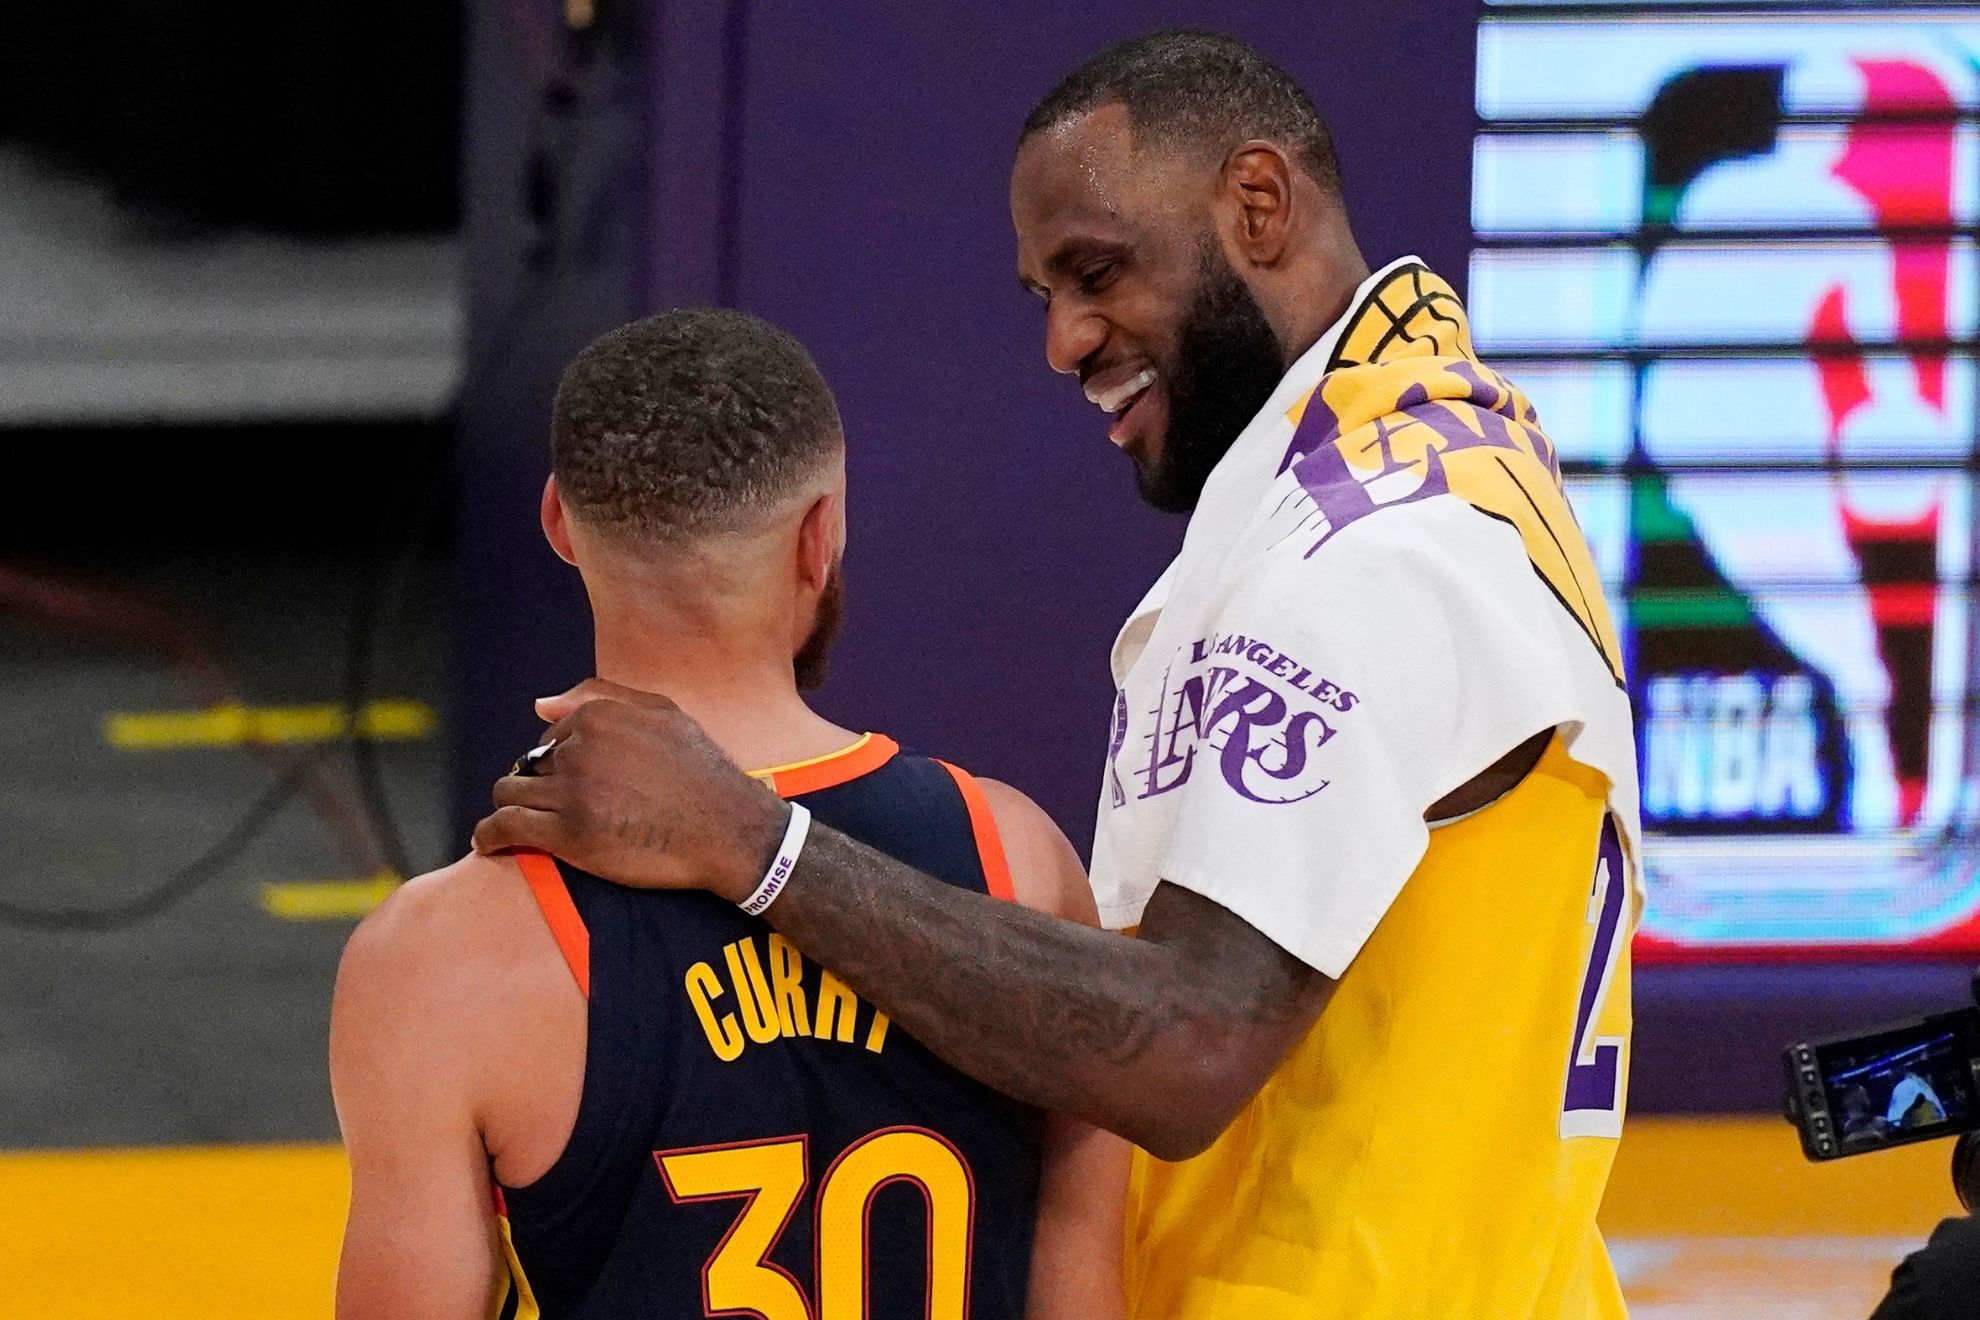 LeBron James recruiting Steph Curry, other NBA stars to join him on Team USA